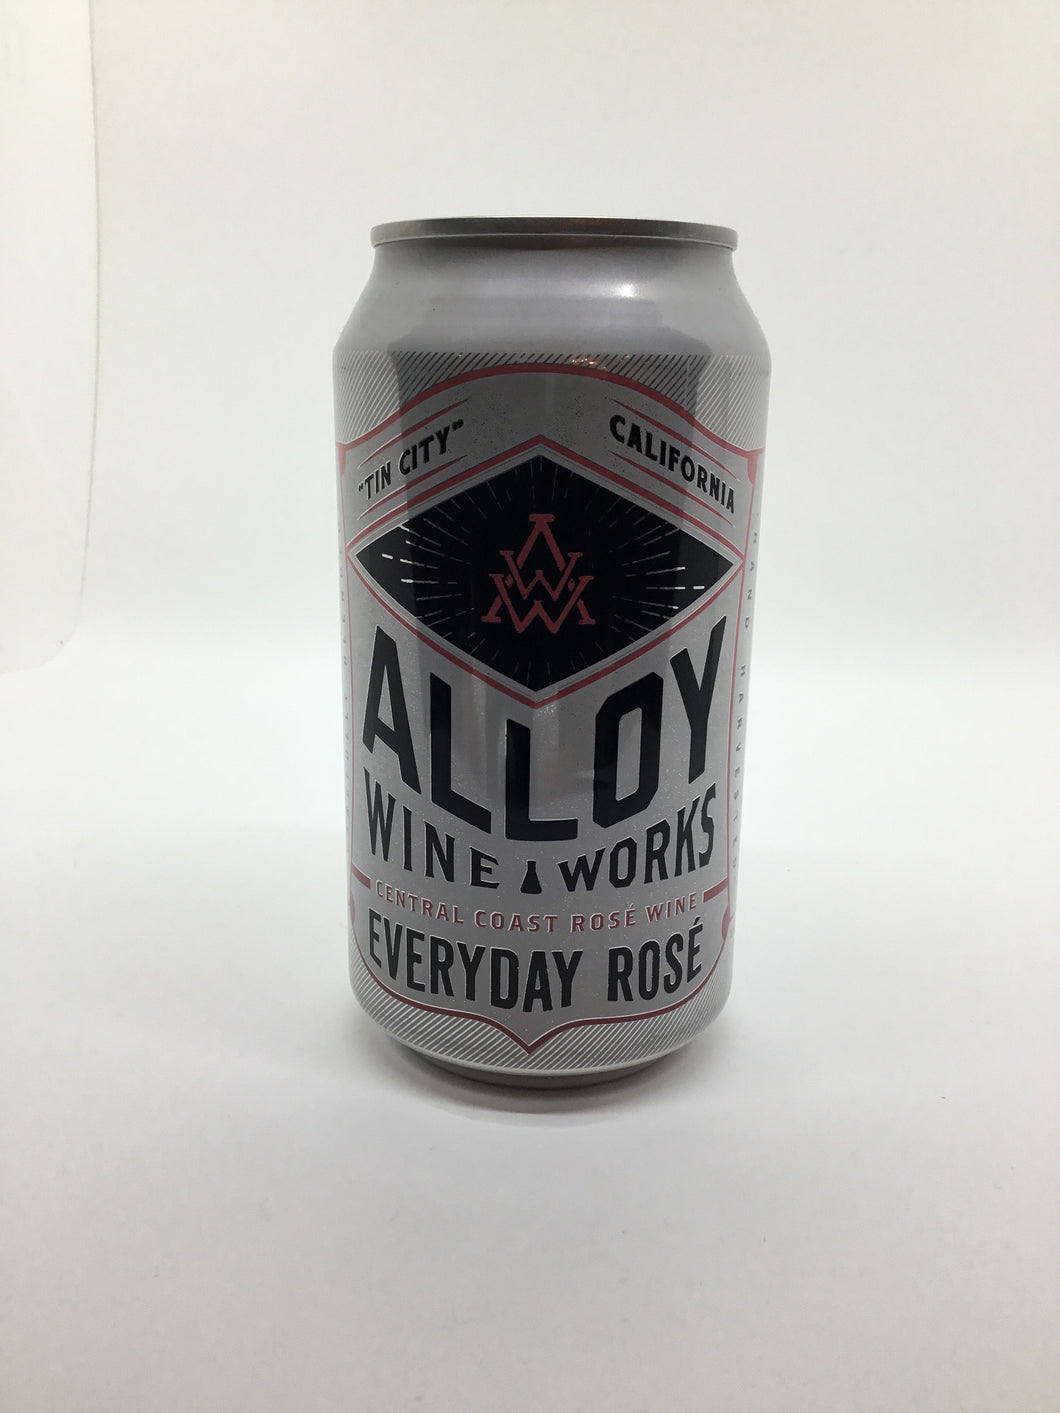 Alloy Wine Works “Everyday Rose” can